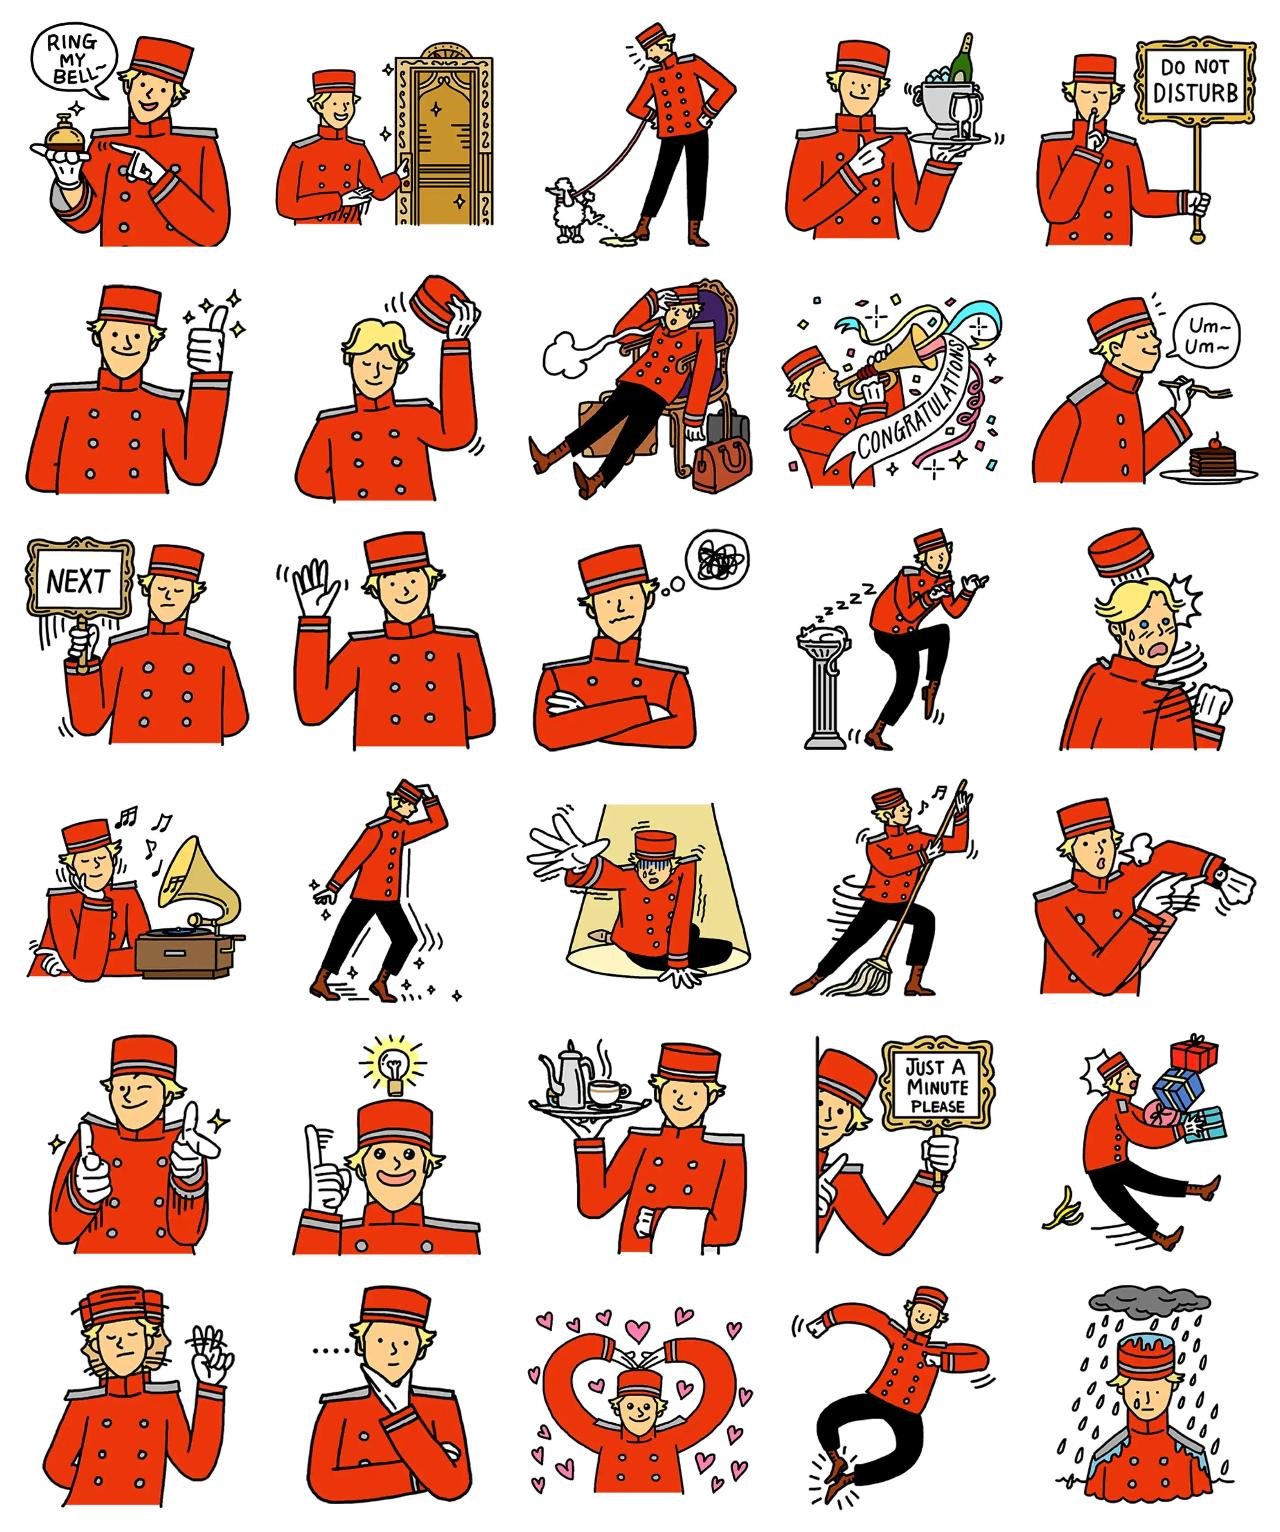 Bellboy Joseph Gag,People sticker pack for Whatsapp, Telegram, Signal, and others chatting and message apps